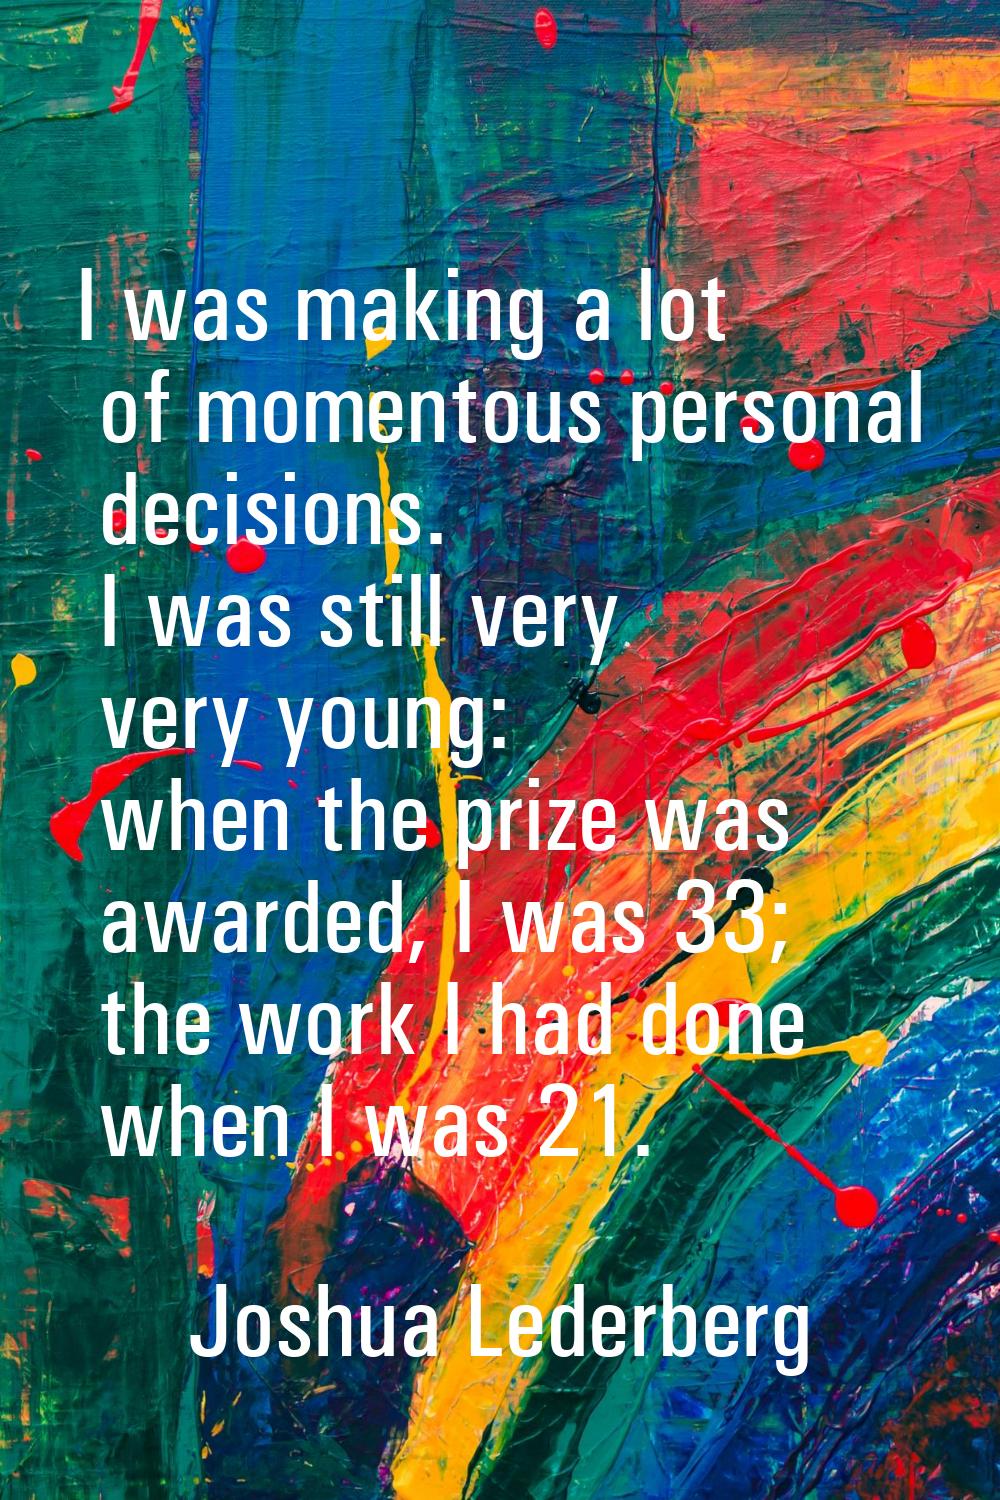 I was making a lot of momentous personal decisions. I was still very very young: when the prize was